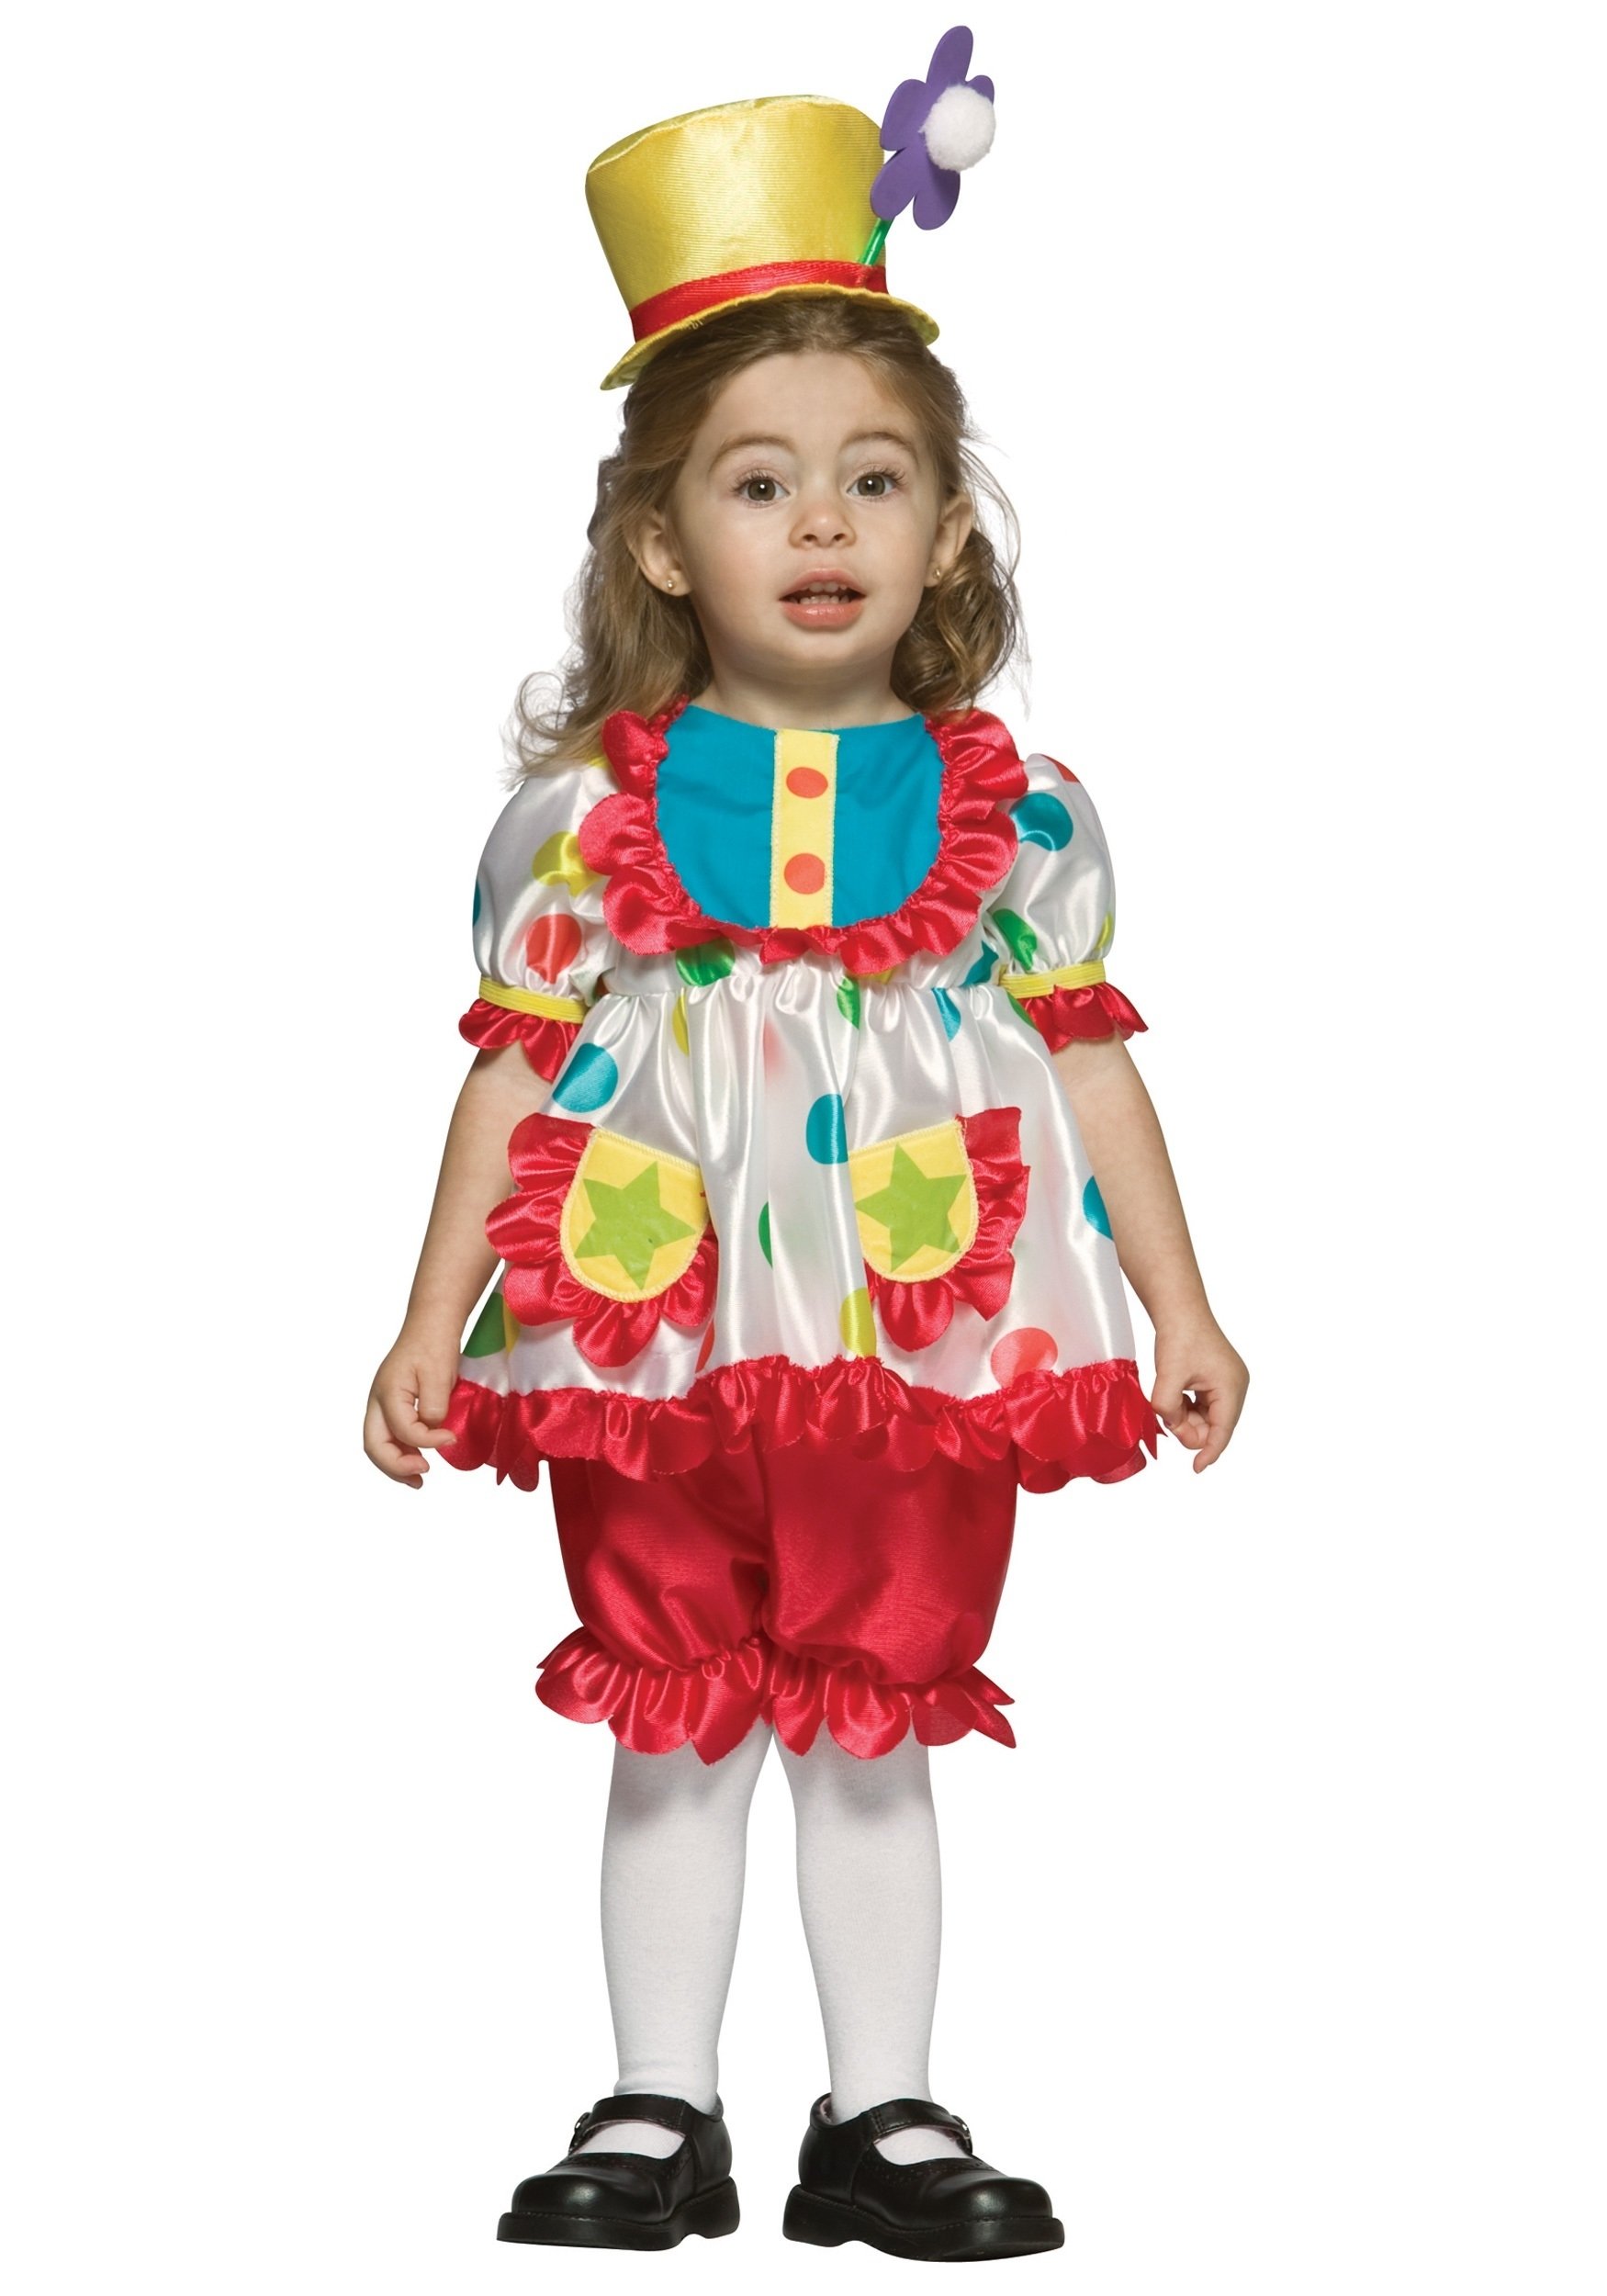 10 Most Recommended Toddler Girl Halloween Costume Ideas toddler girls clown costume halloween costumes 1 2022